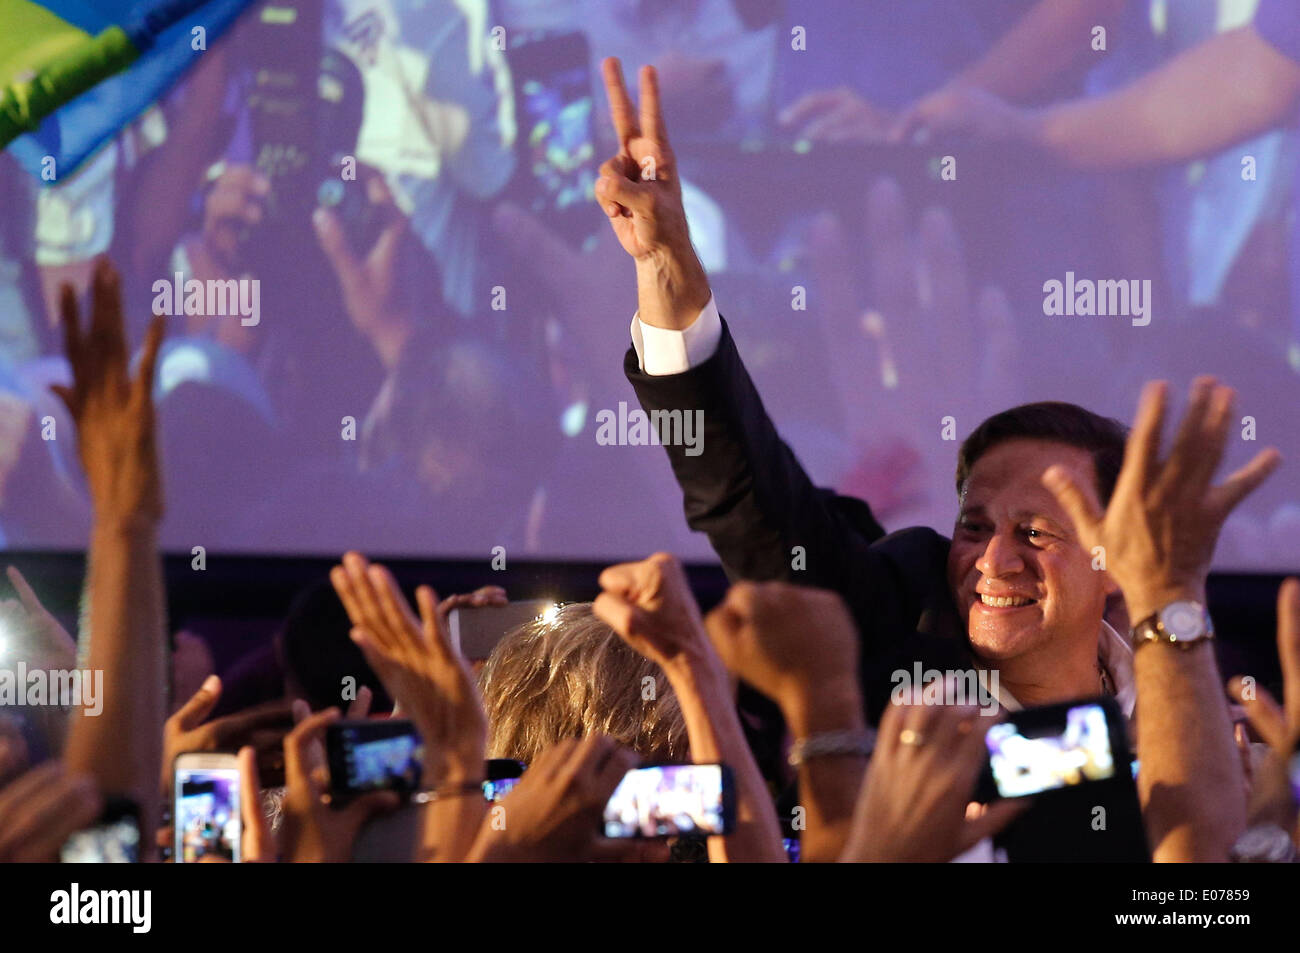 Panama City, Panama. 4th May, 2014. Presidential candidate Juan Carlos Varela (R) from the Panamenista Party greets his supporters after the preliminary results of the general elections, in Panama City, capital of Panama, on May 4, 2014. President of the Supreme Electoral Court Erasmo Pinilla said on Sunday night that Juan Carlos Varela is the virtual winner of Panama's presidency. © Mauricio Valenzuela/Xinhua/Alamy Live News Stock Photo